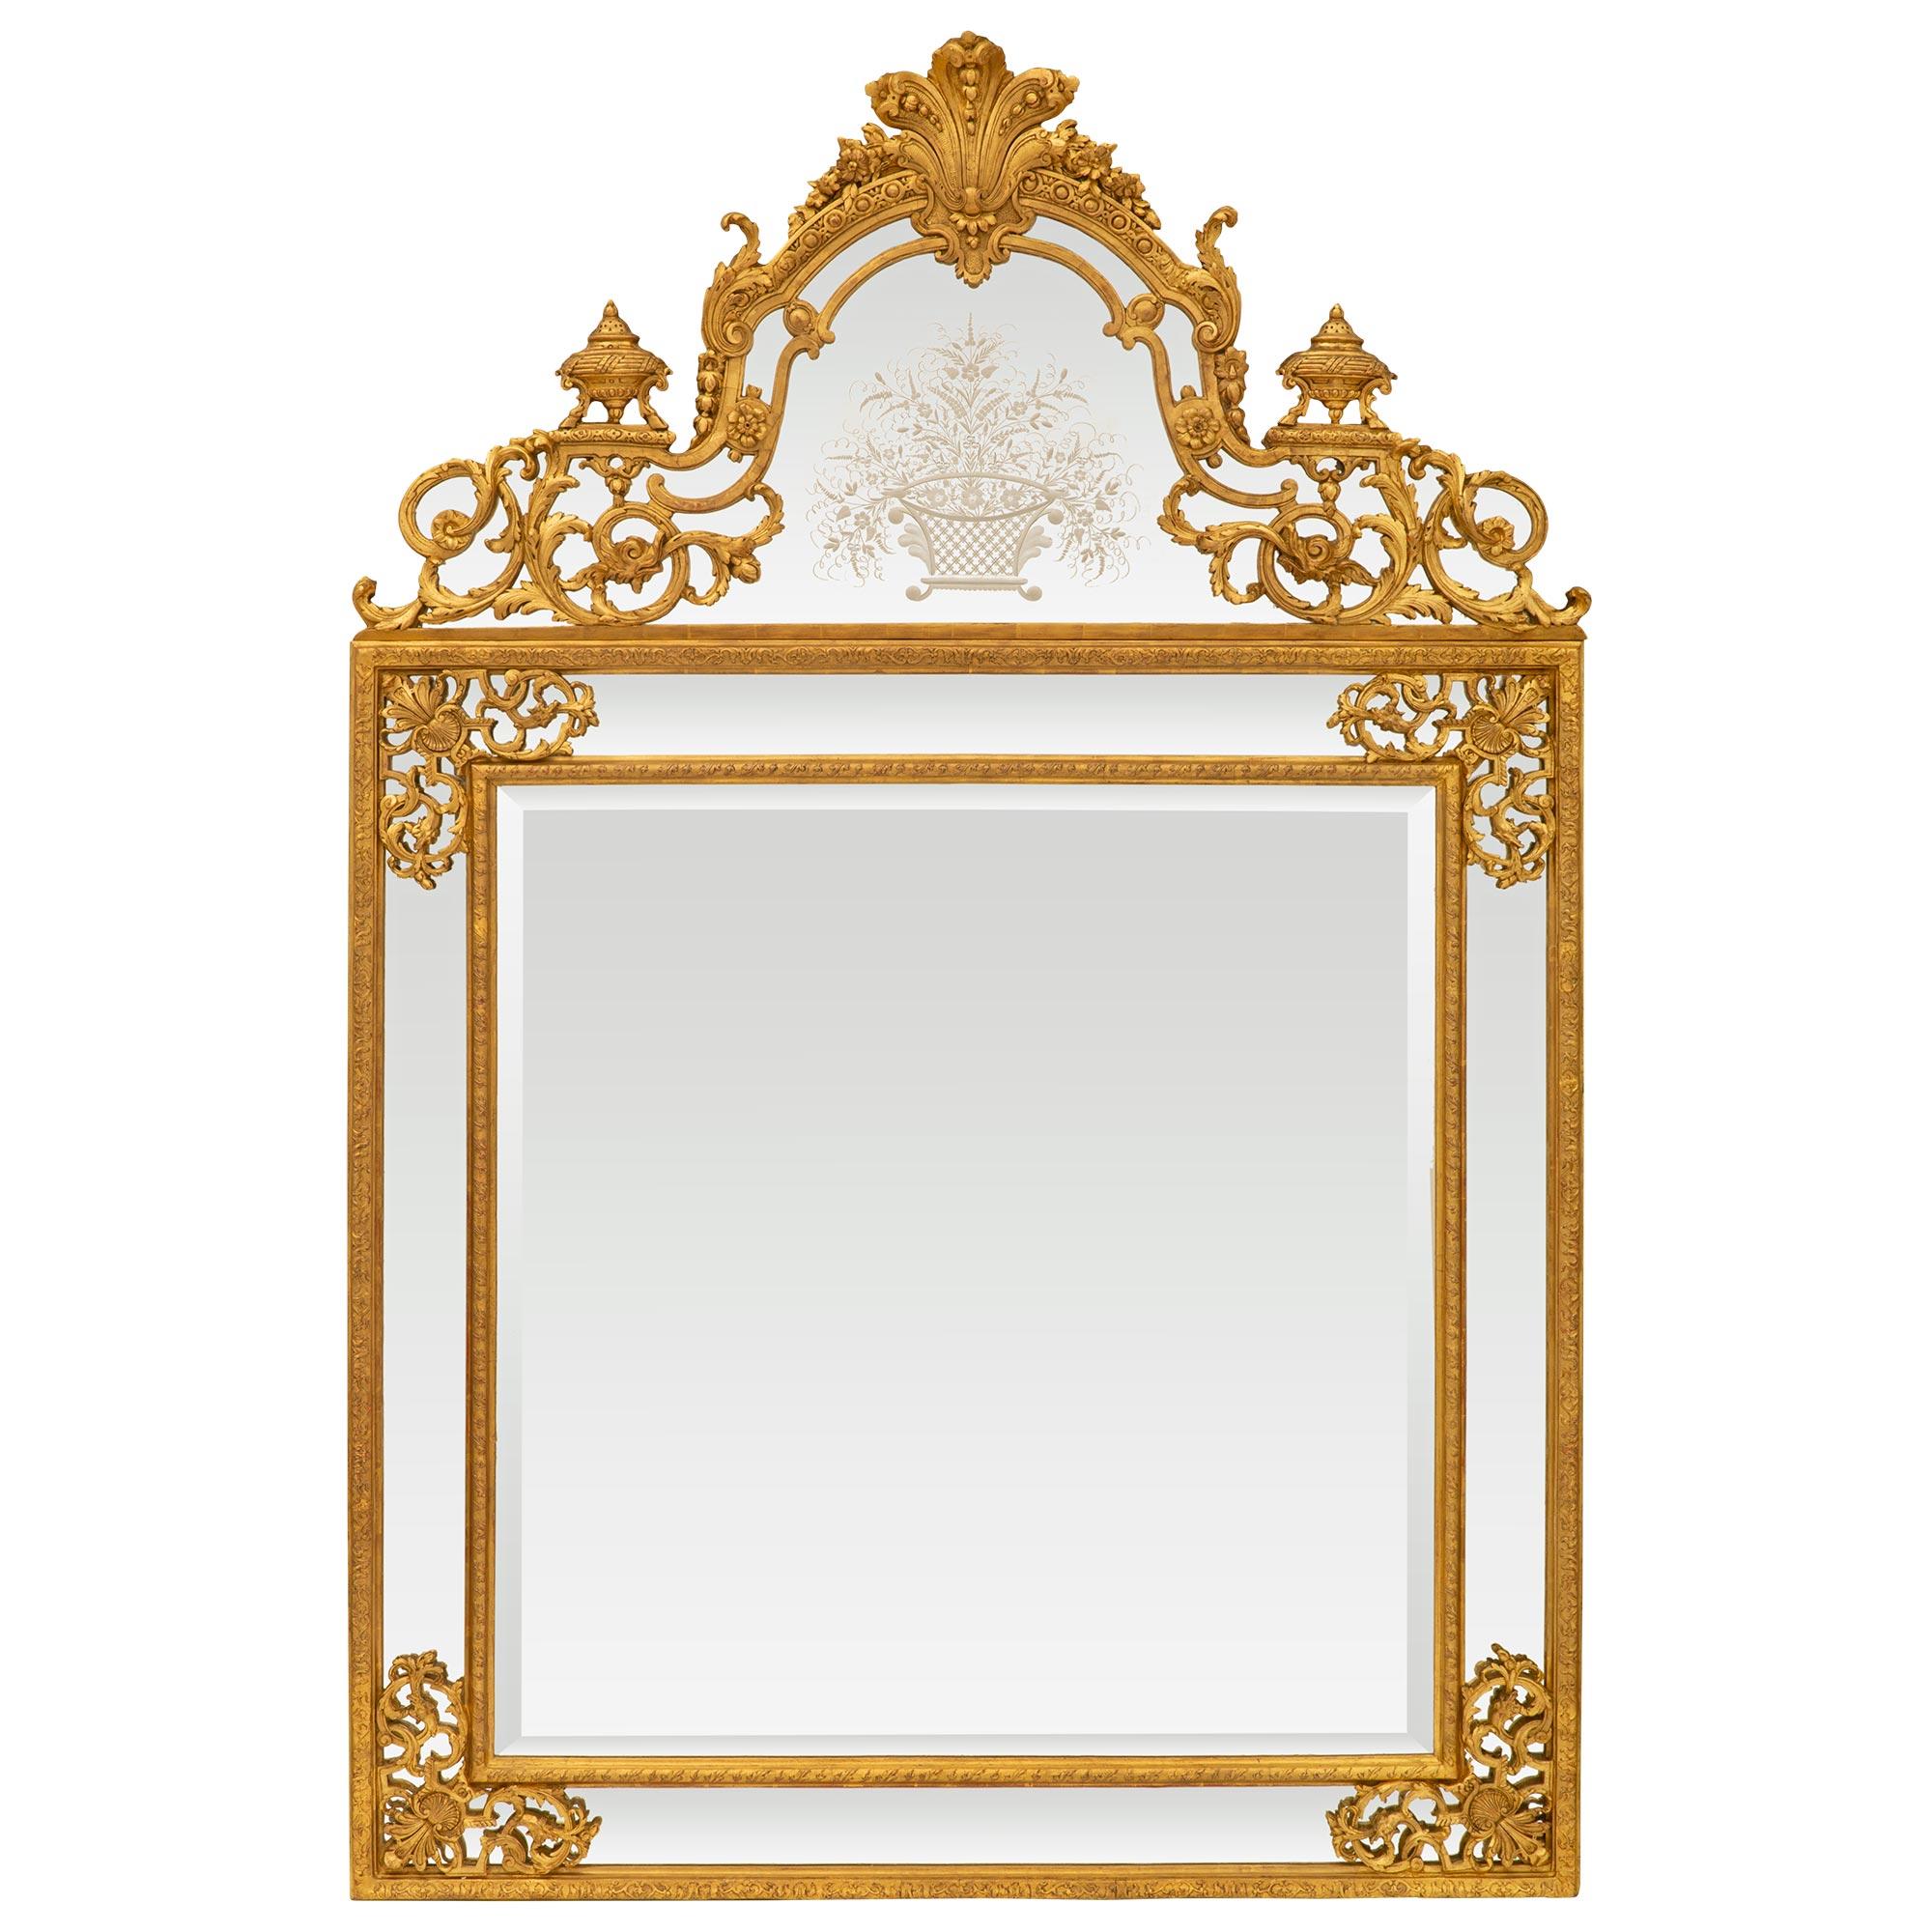 French Mid-19th Century Regence St. Double Framed Giltwood Mirror For Sale 5